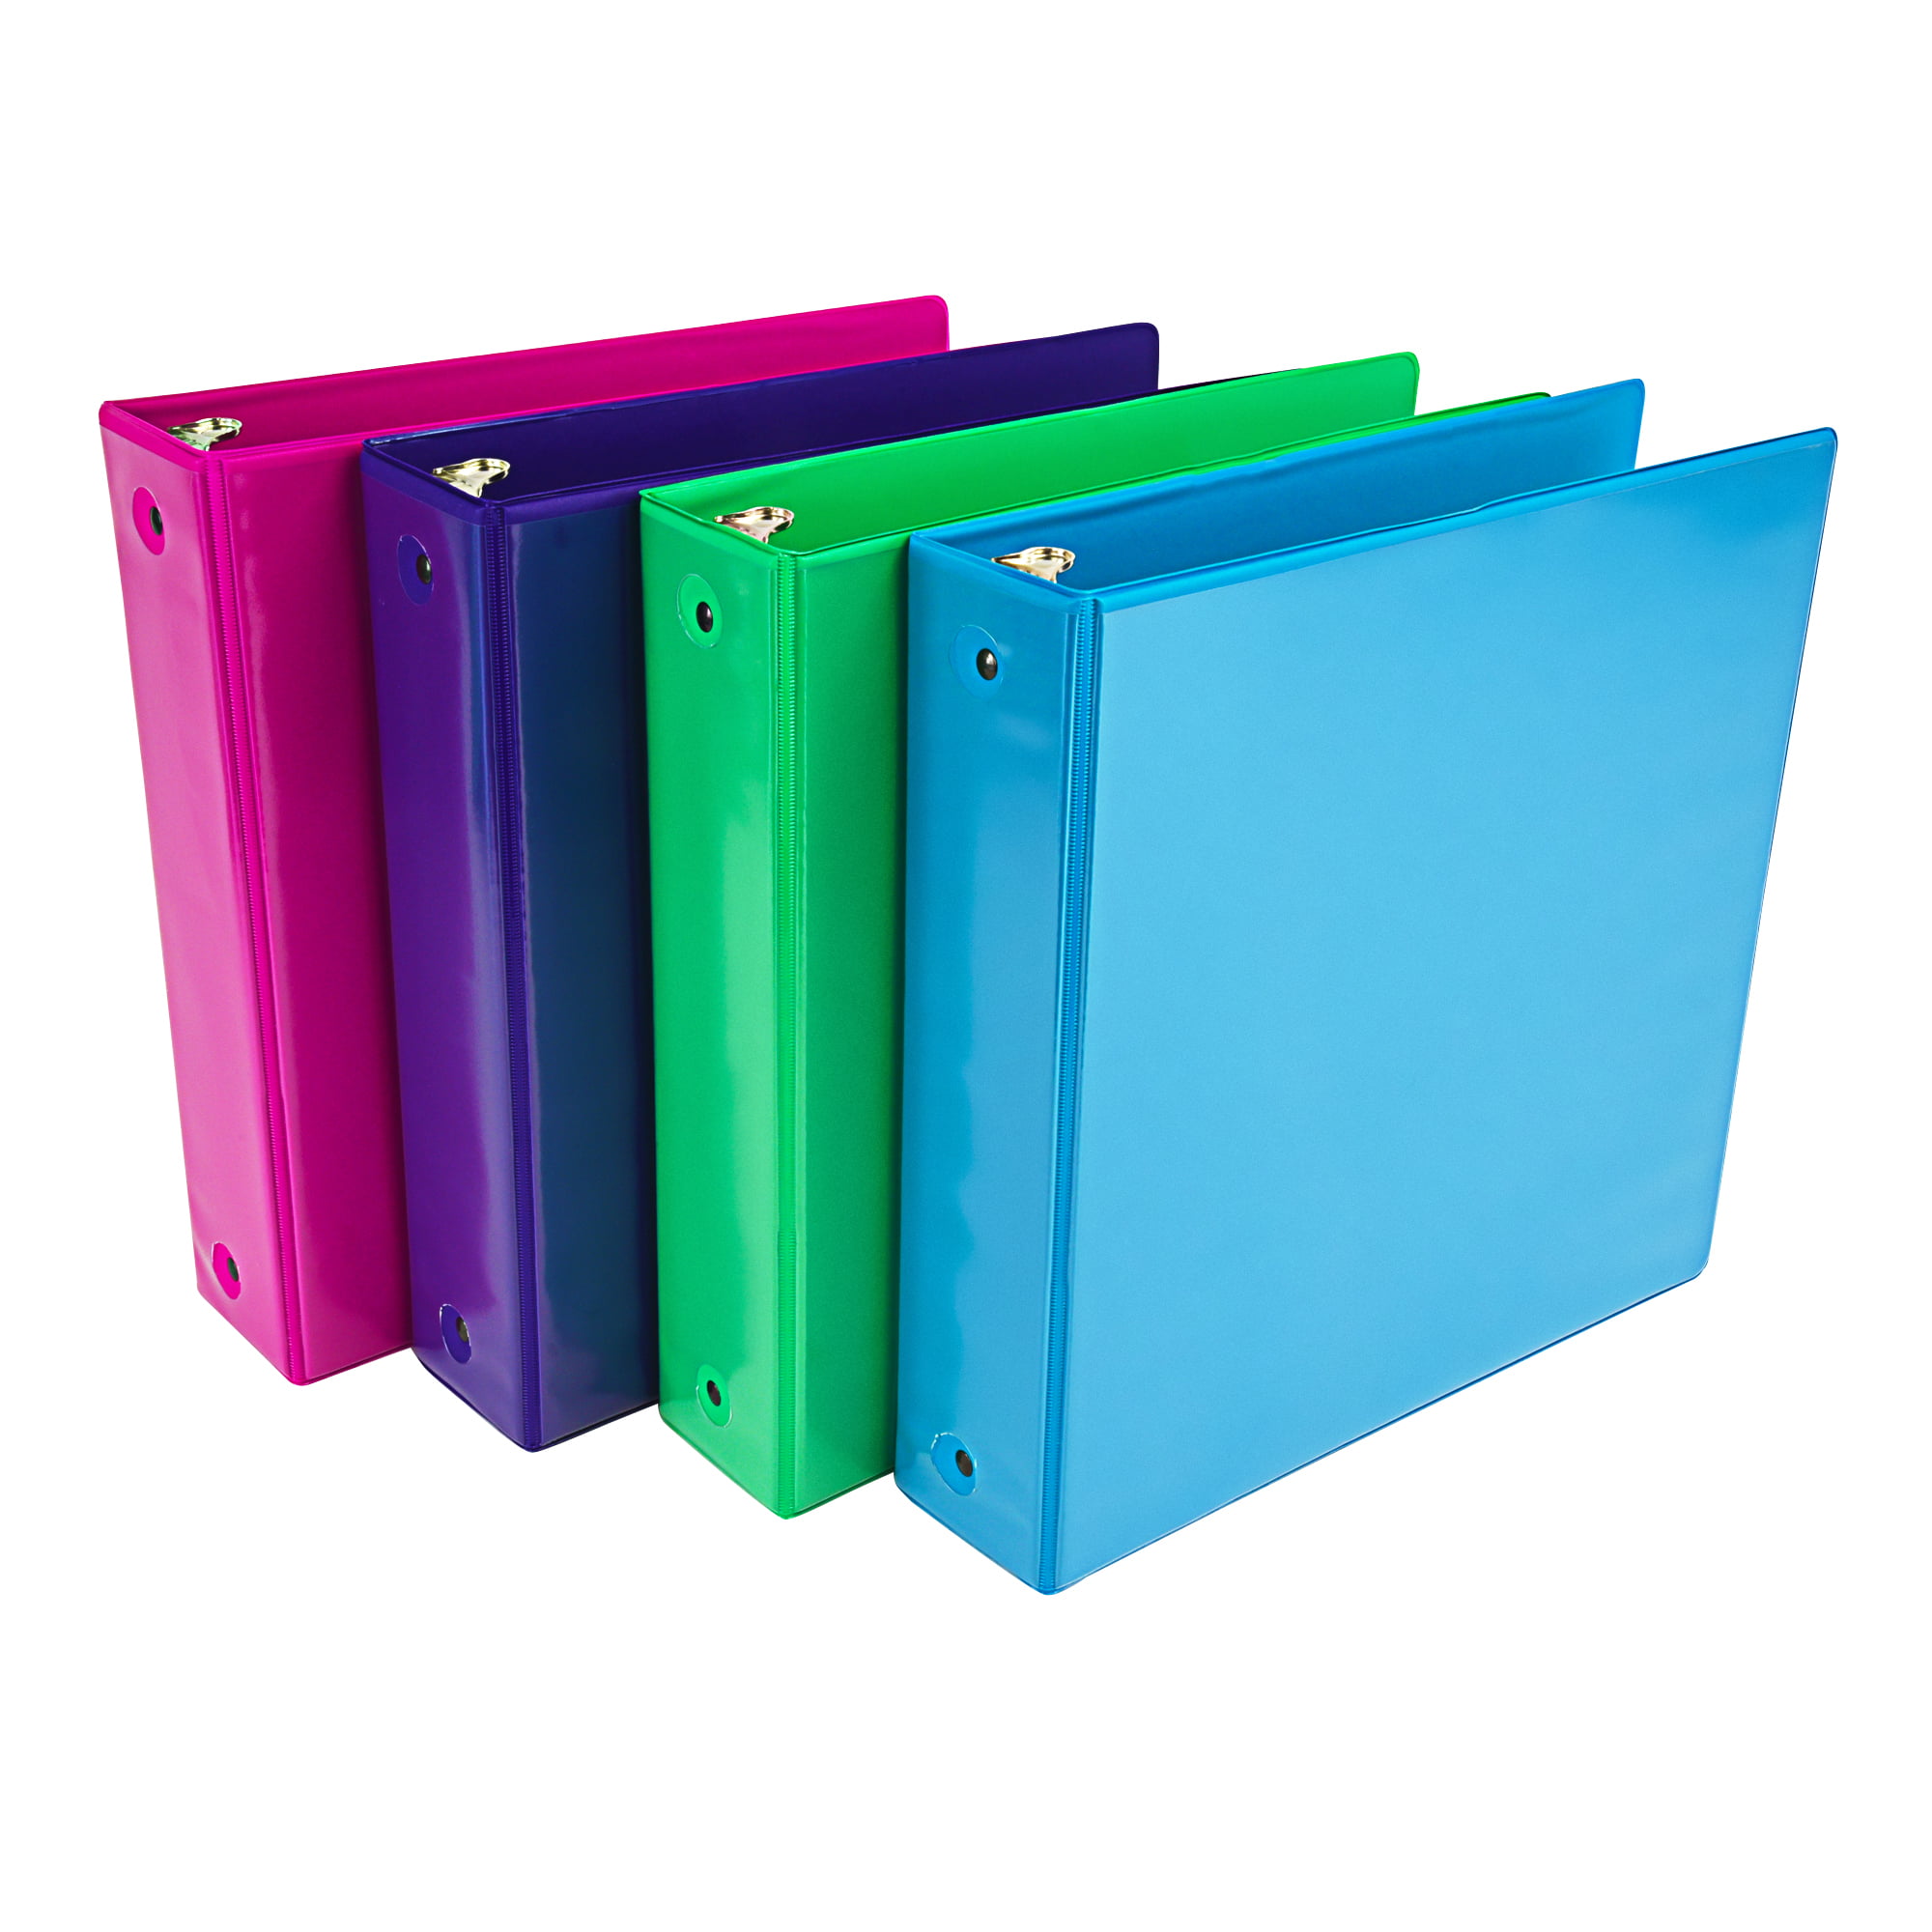 Samsill Fashion Color 2" Round Ring View Binders, Assorted Colors, 4 Pack